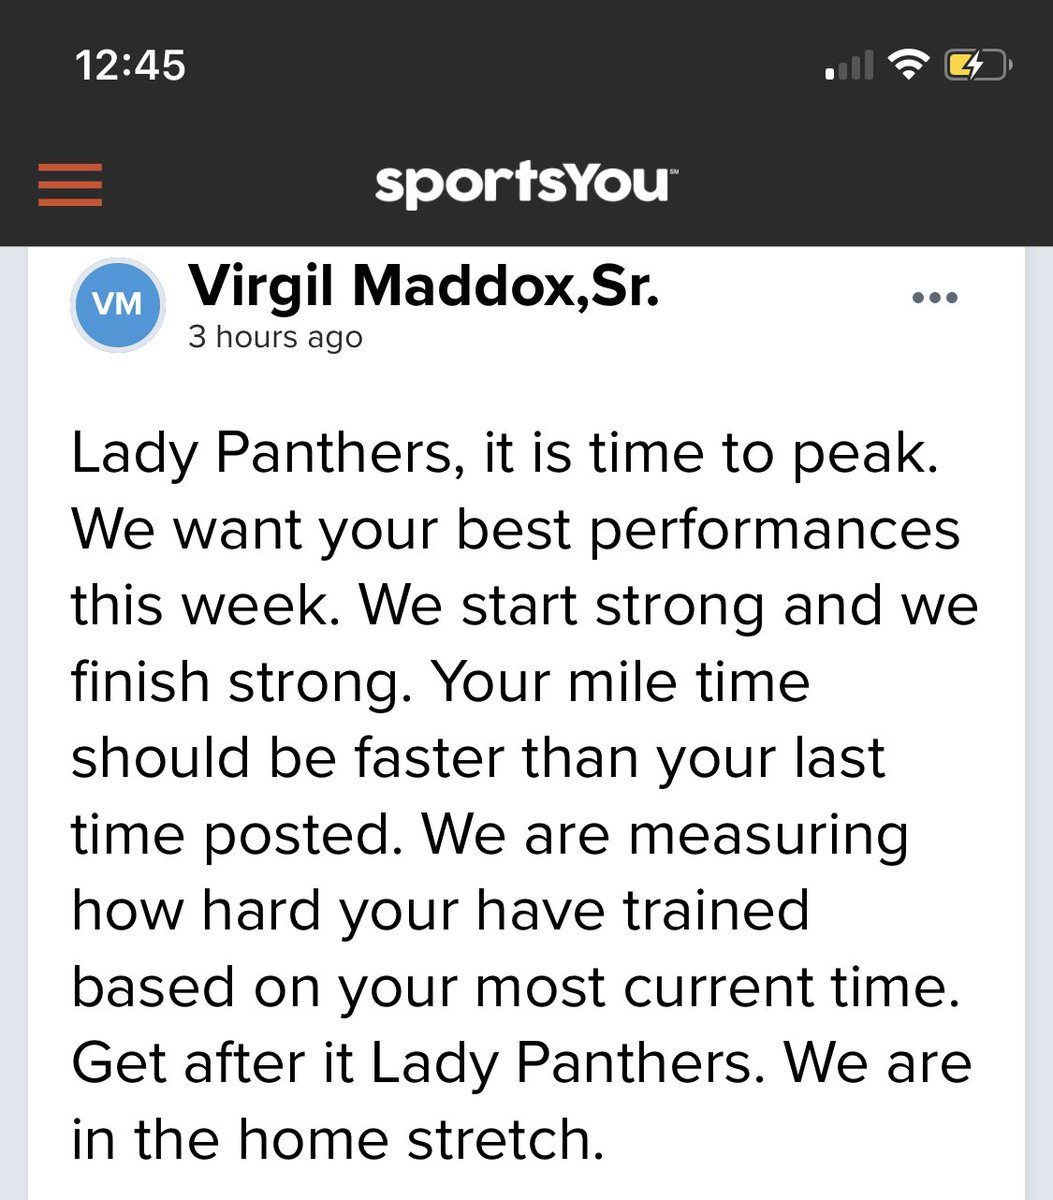 Shout-out to Coach Maddox for keeping our lady panthers encouraged!🏃🏼‍♀️ 🏃🏾‍♀️🏀 #StaffAppreciationPost